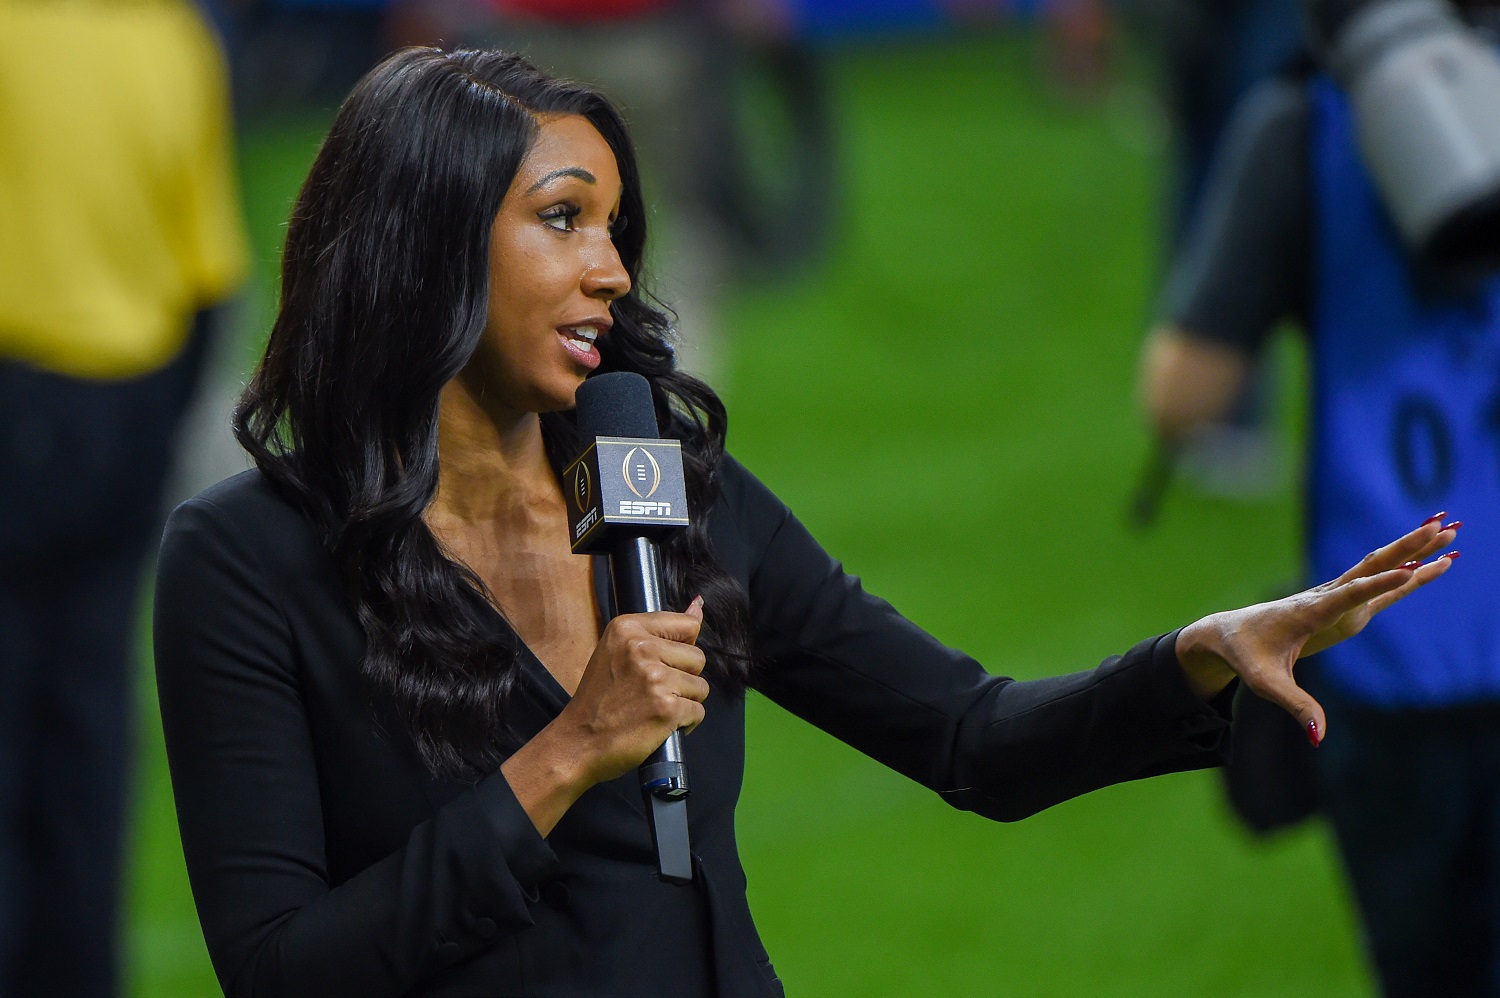 Analyst Maria Taylor reports from the sideline during the Allstate Sugar Bowl College Football Playoff semifinal between Ohio State and Clemson.